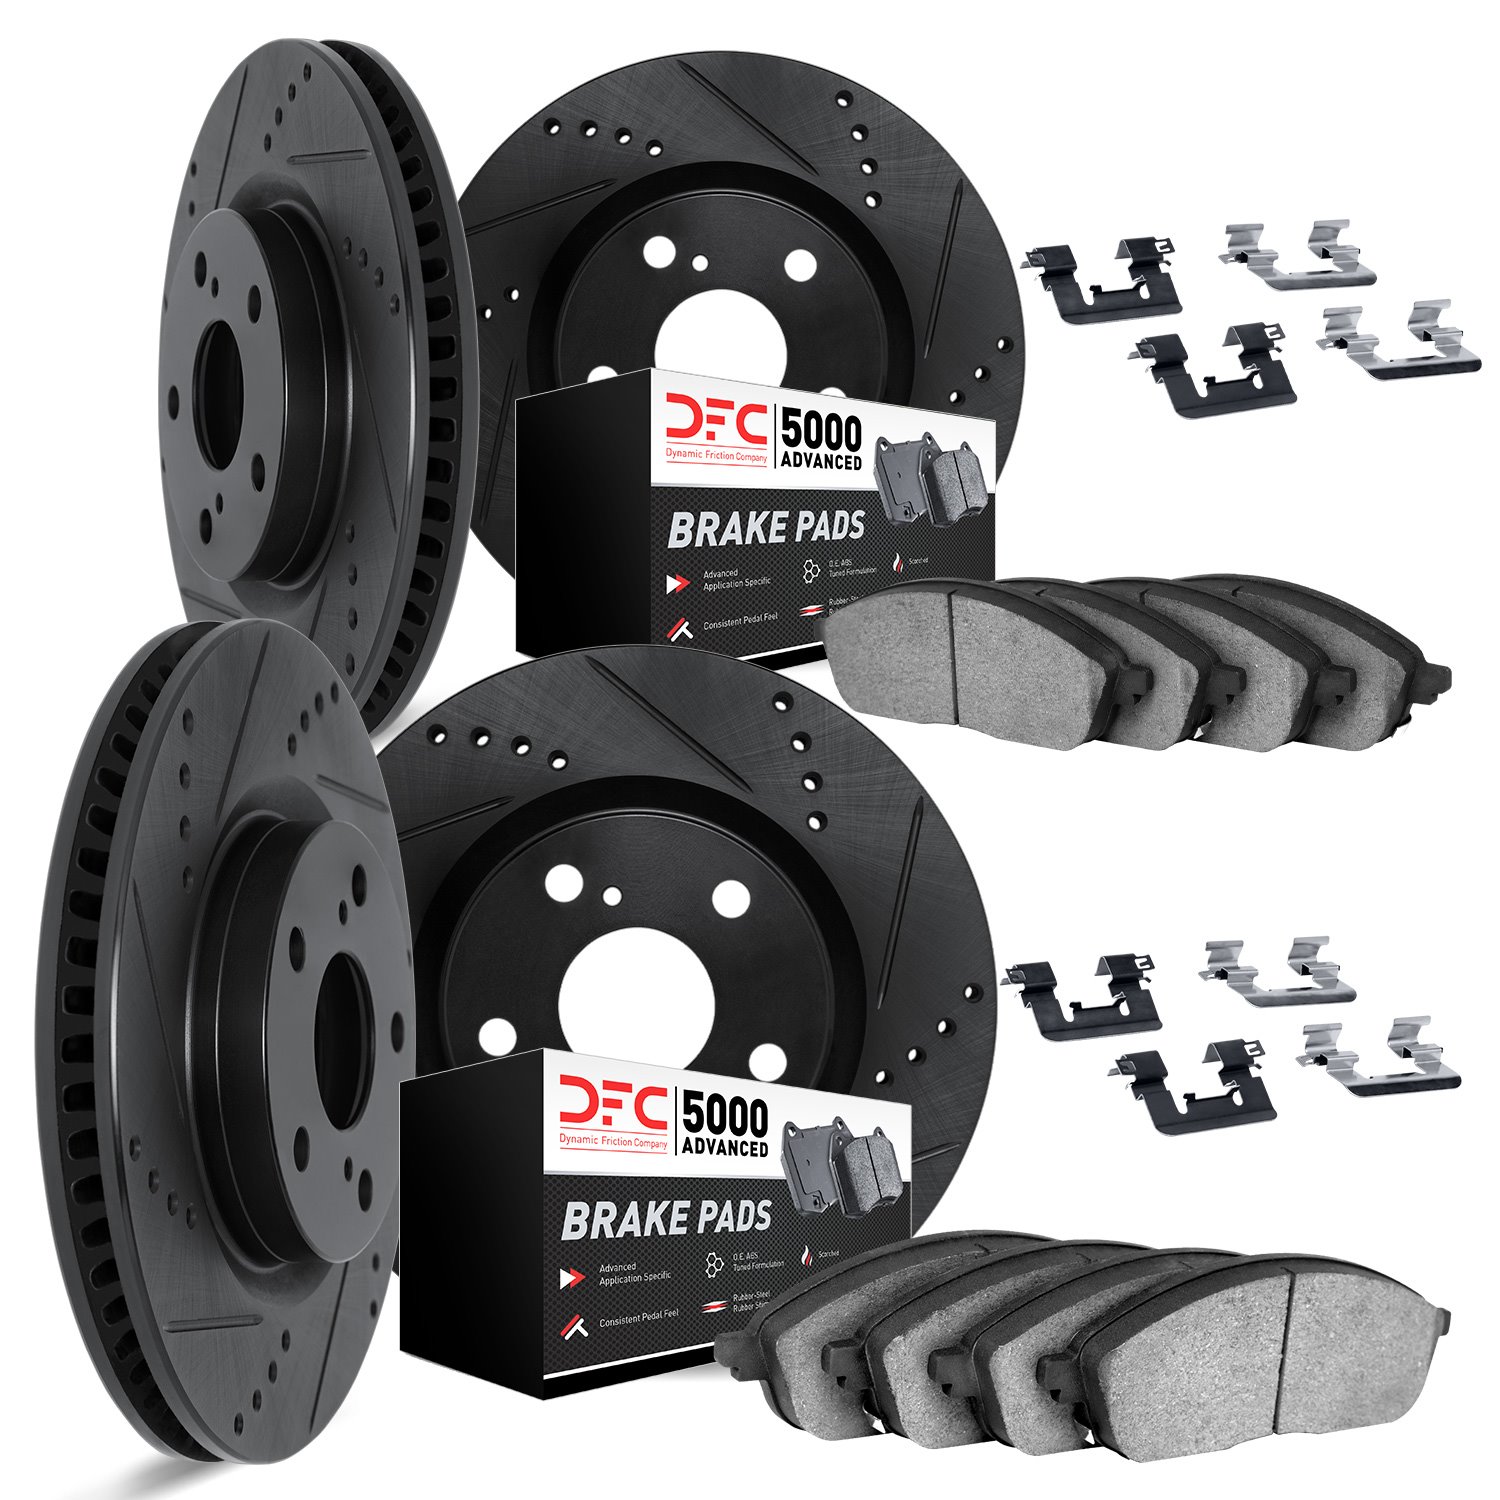 8514-31043 Drilled/Slotted Brake Rotors w/5000 Advanced Brake Pads Kit & Hardware [Black], 2011-2016 BMW, Position: Front and Re